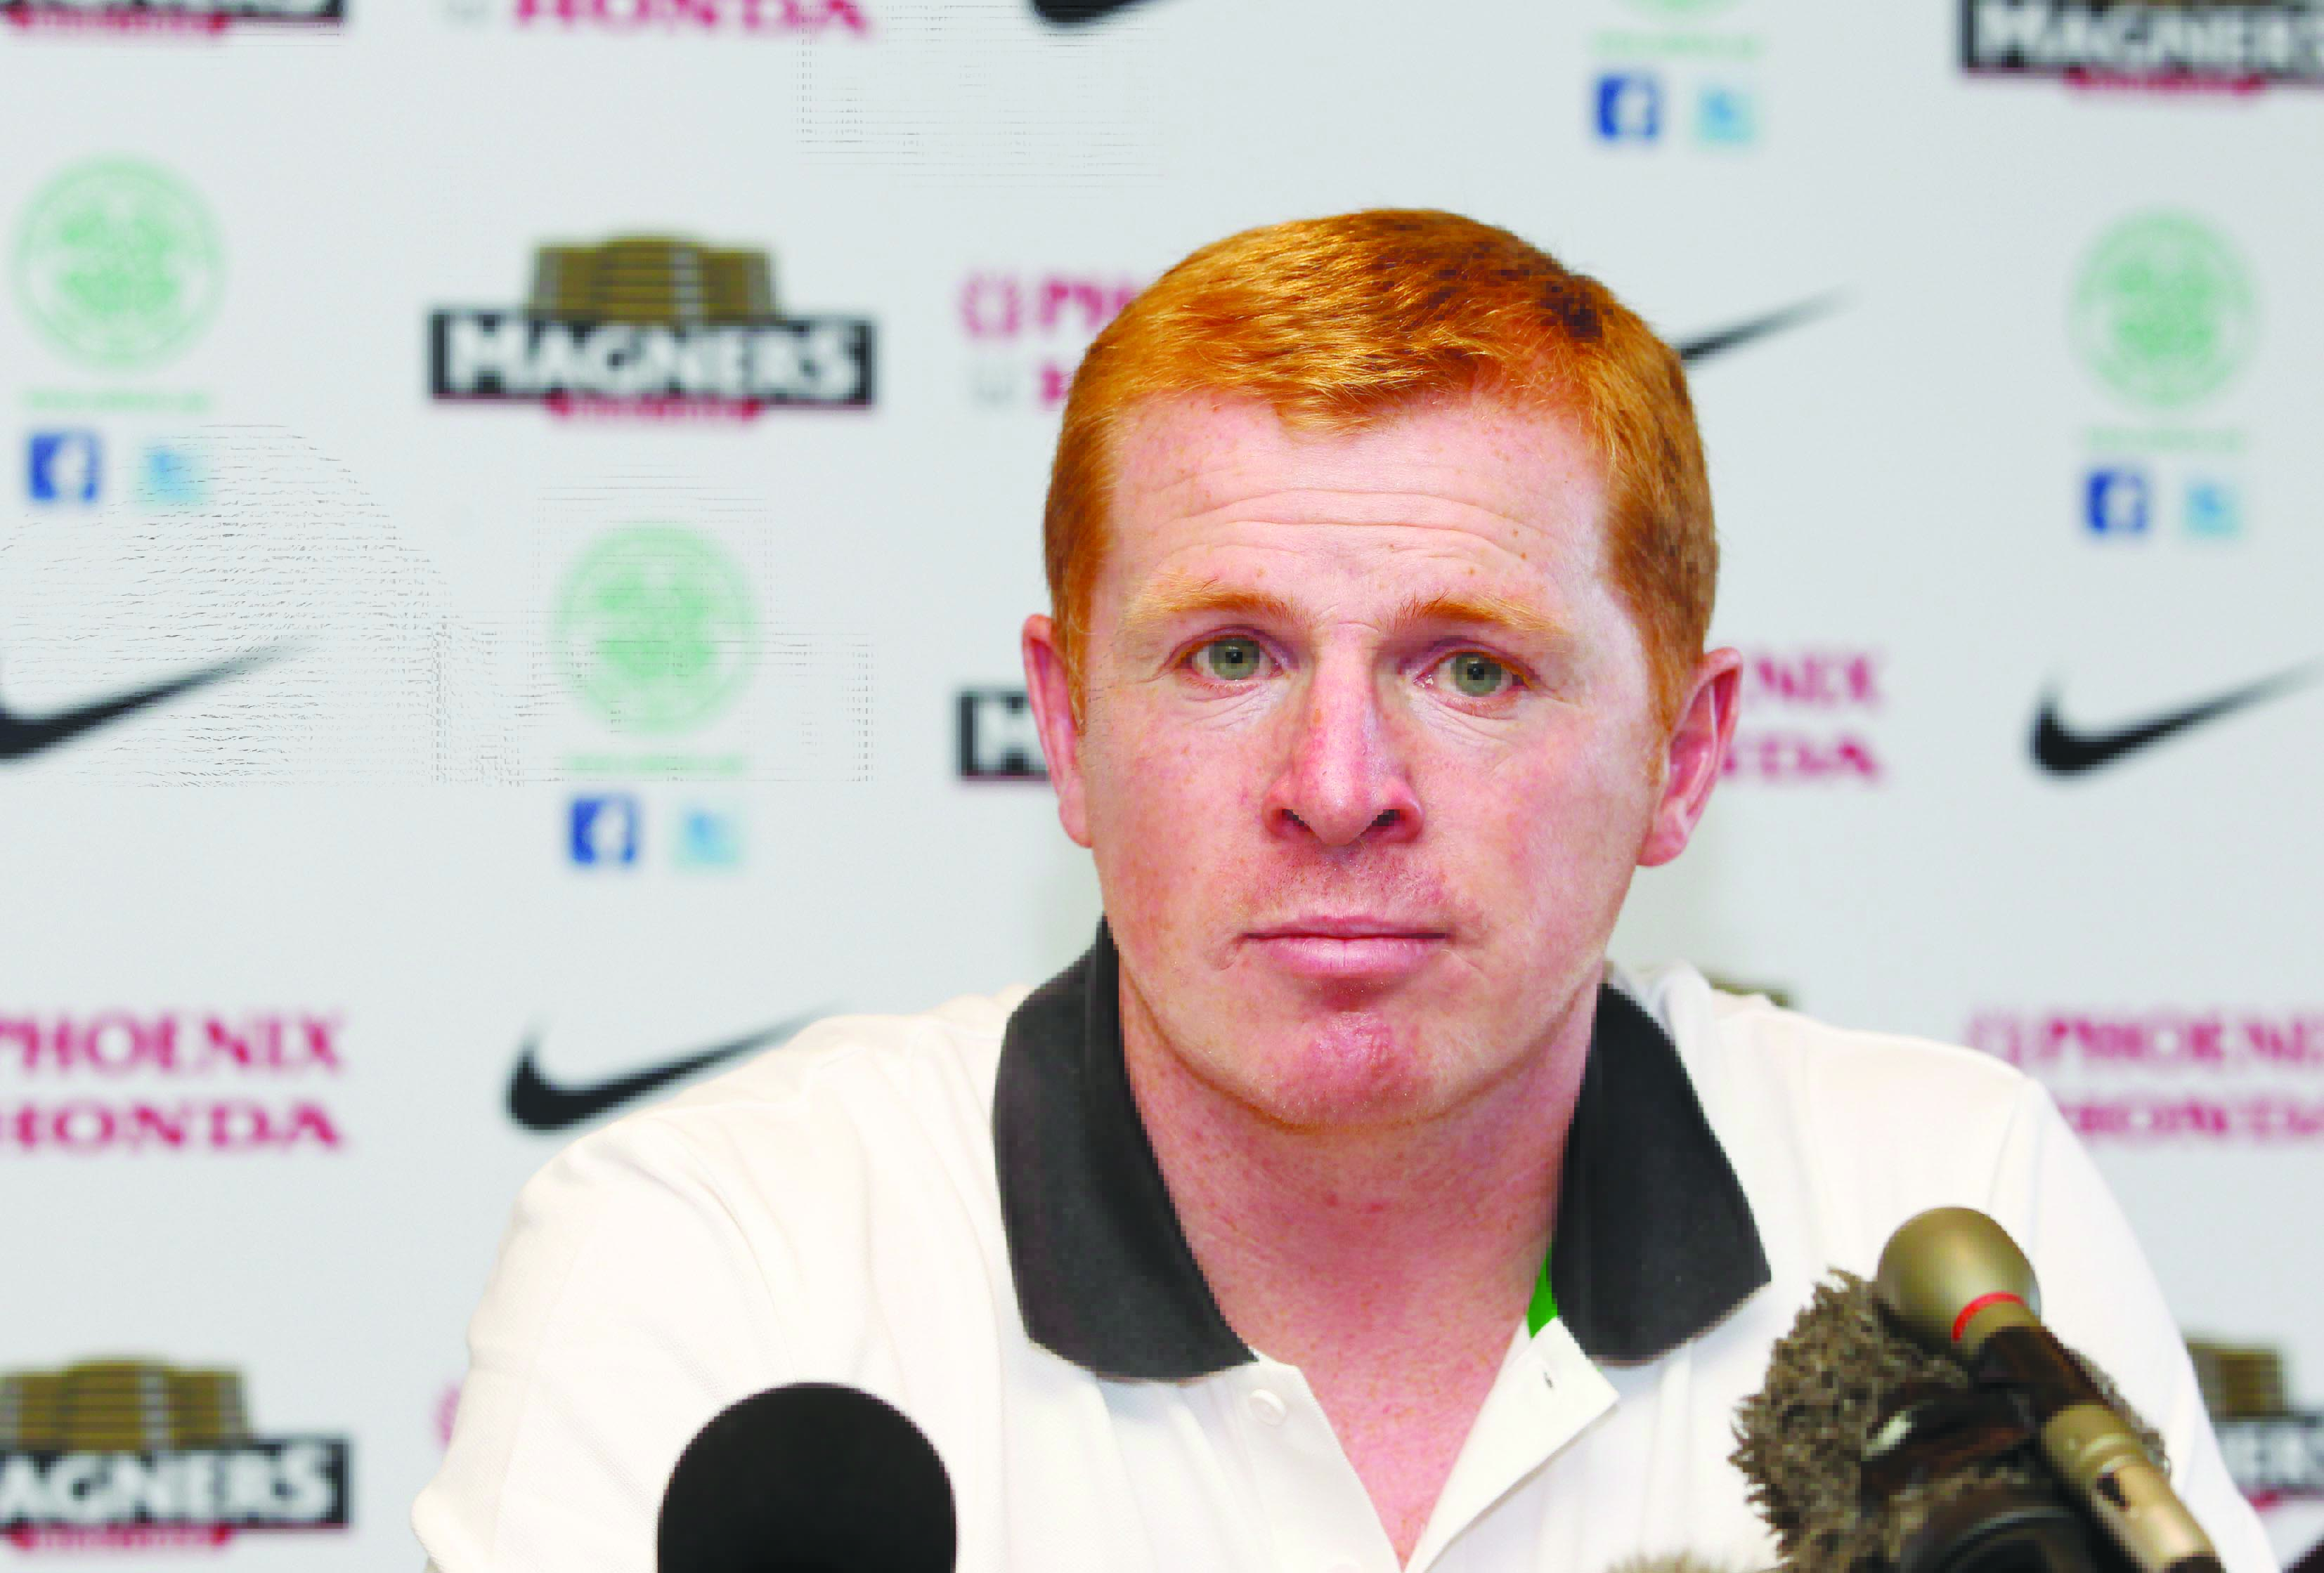 Neil Lennon has come in for criticism by some elements of the Celtic support due to recent team selections